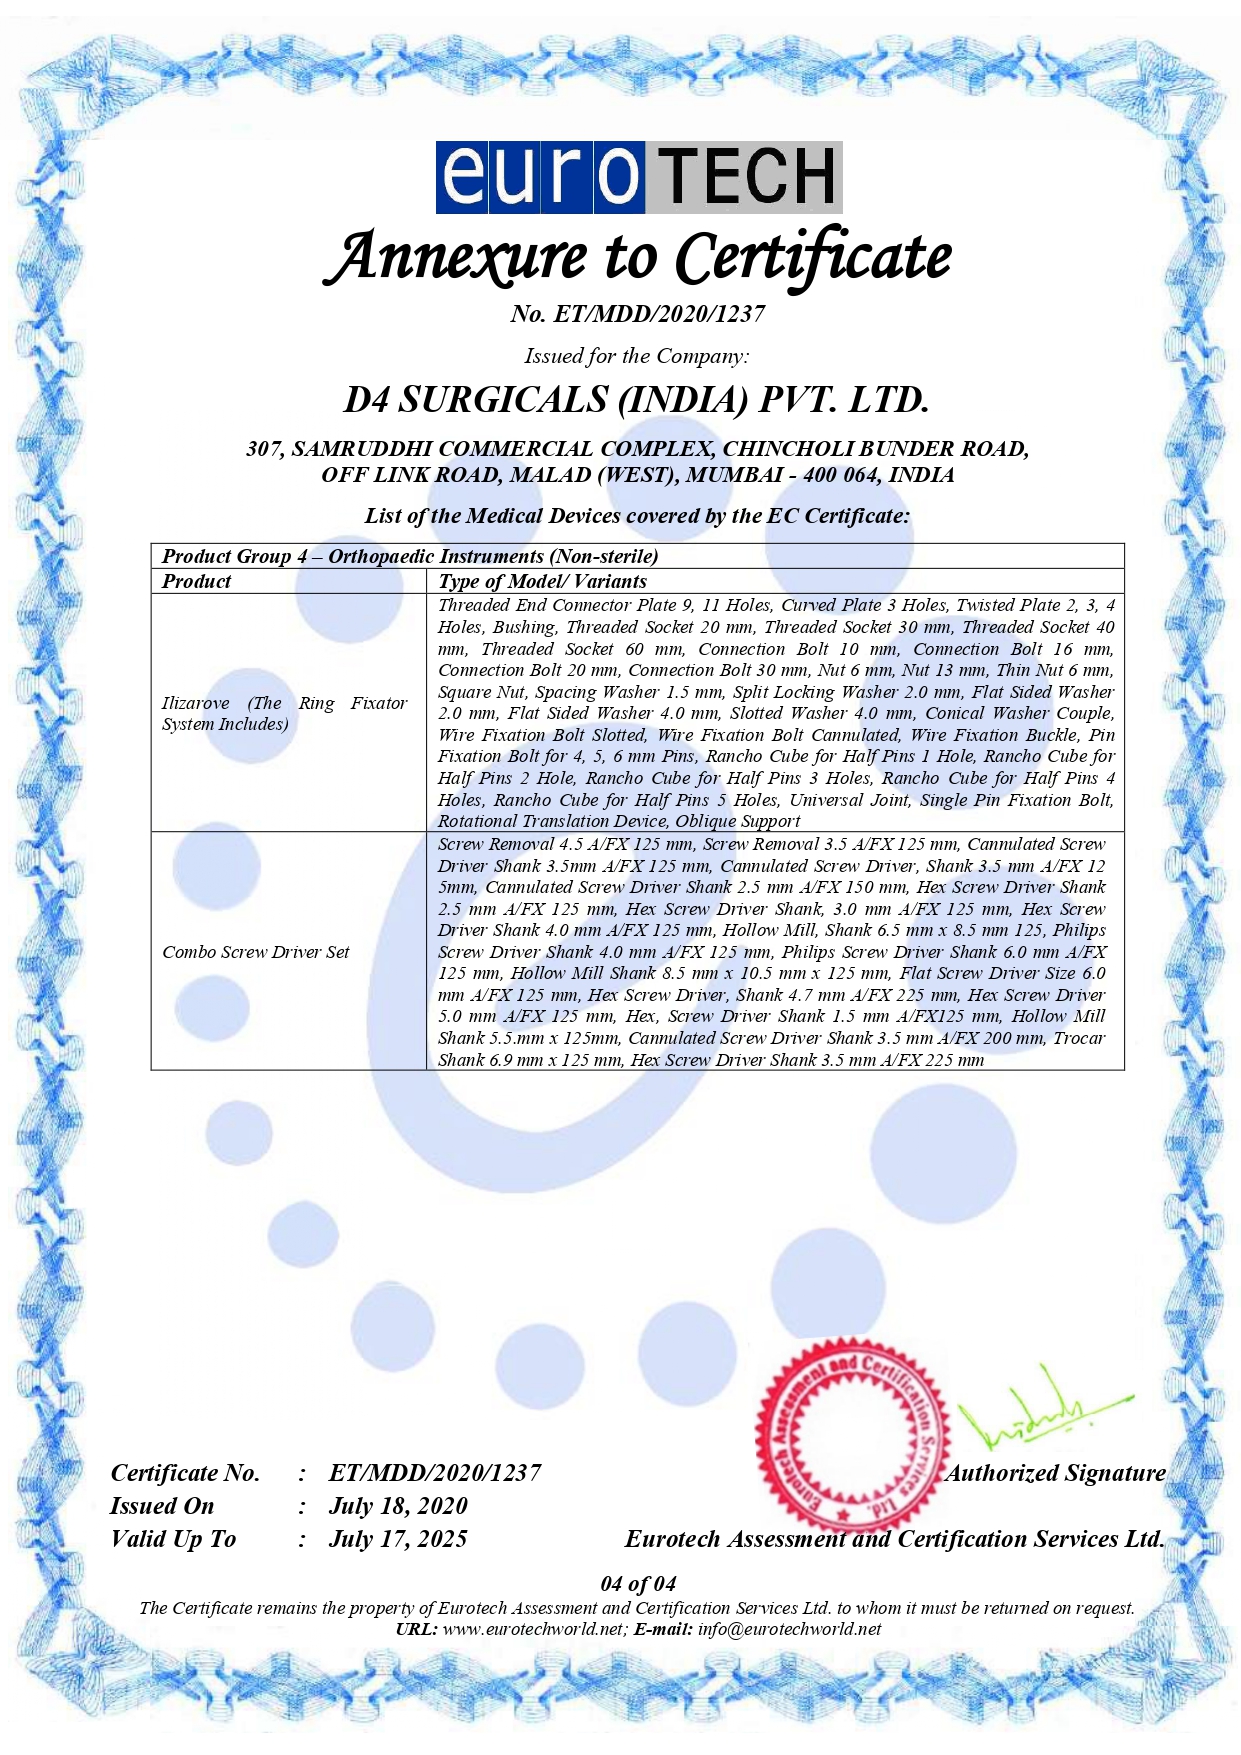 Annexure to certificate 2020-1237 - product grp-4.jpg